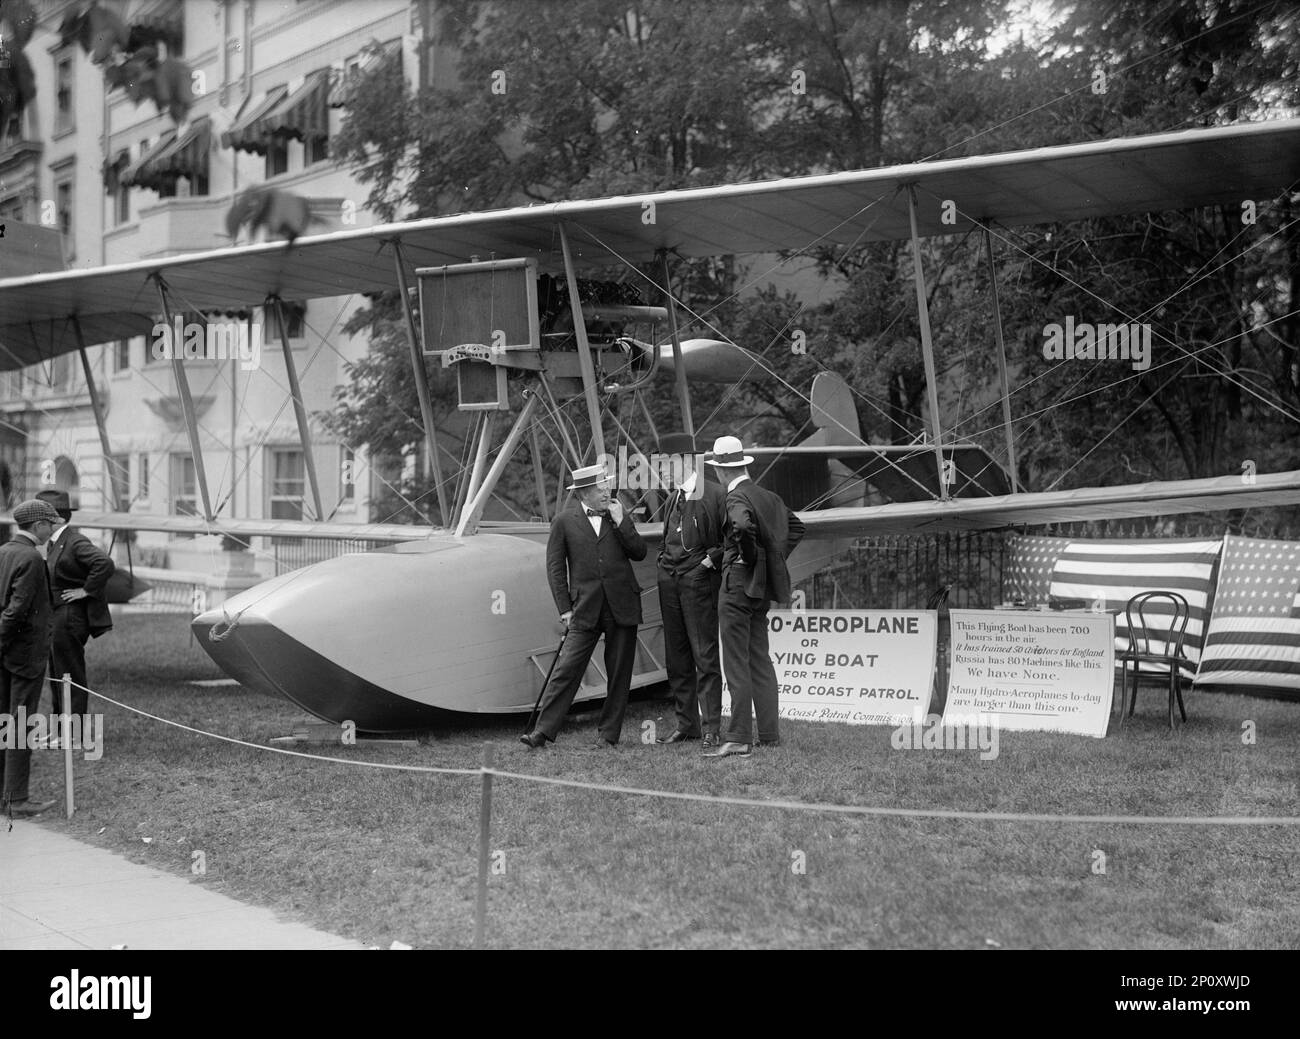 National Aero Coast Patrol Commission - Curtiss Hydroaeroplane or Flying Boat Exhibited Near House Office Building, Frankenfield; Rep. Curry; Bowman, 1917.Signs: 'Hydro-Aeroplane or Flying Boat for the National Aero Coast Patrol - National Aerial Coast Patrol Commission. This Flying Boat has been 700 hours in the Air. It has trained 50 Aviators for England. Russia has 80 Machines like this. We have None. Many Hydro-Aeroplanes to-day are larger than this one'. Stock Photo